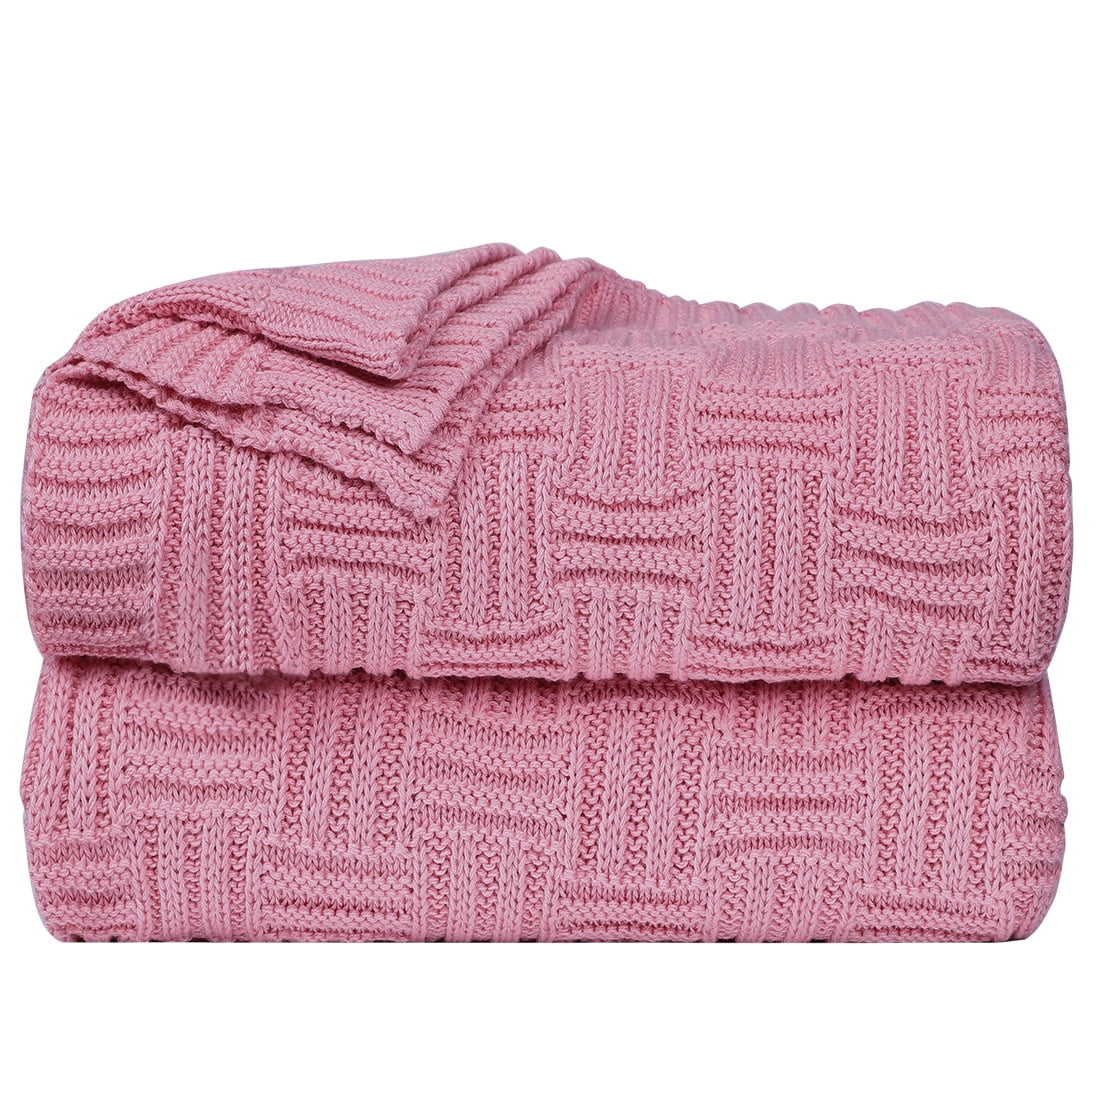 Knitted Throw Blanket For Sofa Couch Soft 100 Cotton Home Office Blanket Pink Walmart Canada